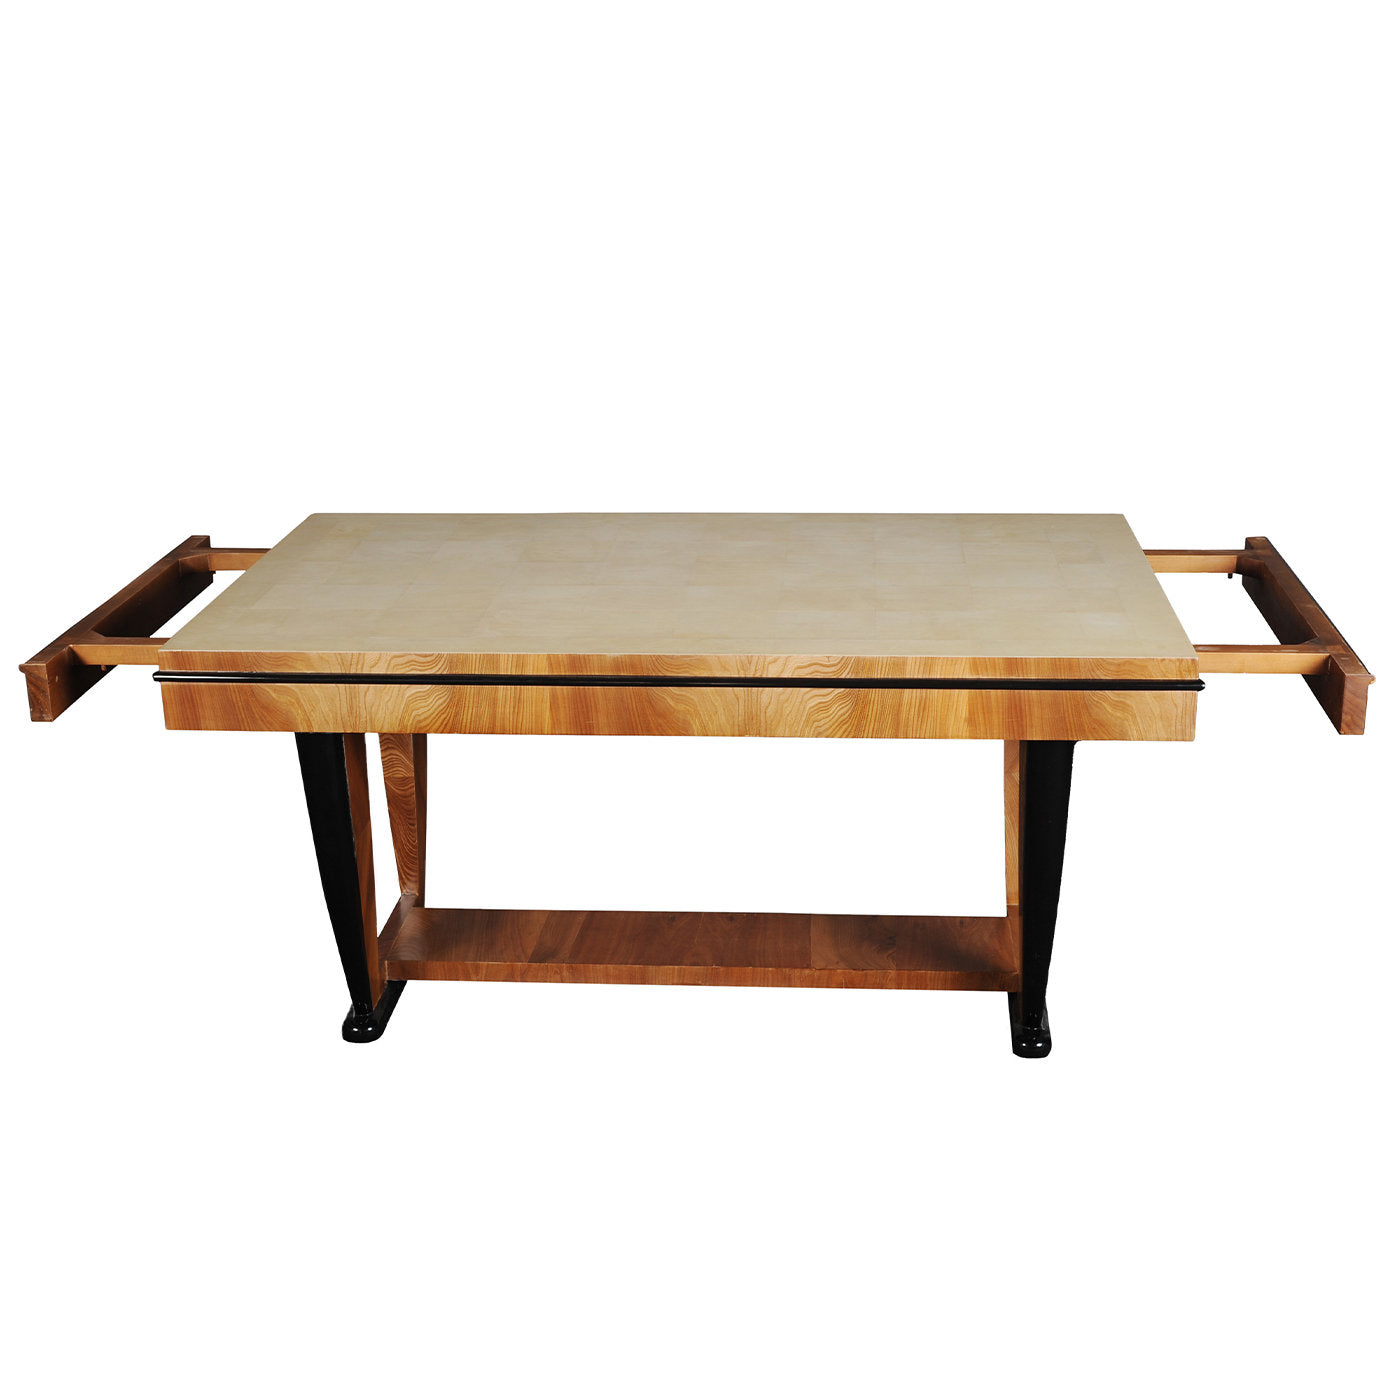 PLM-0001 Ivory Parchment Dining Table - Alternative view 2